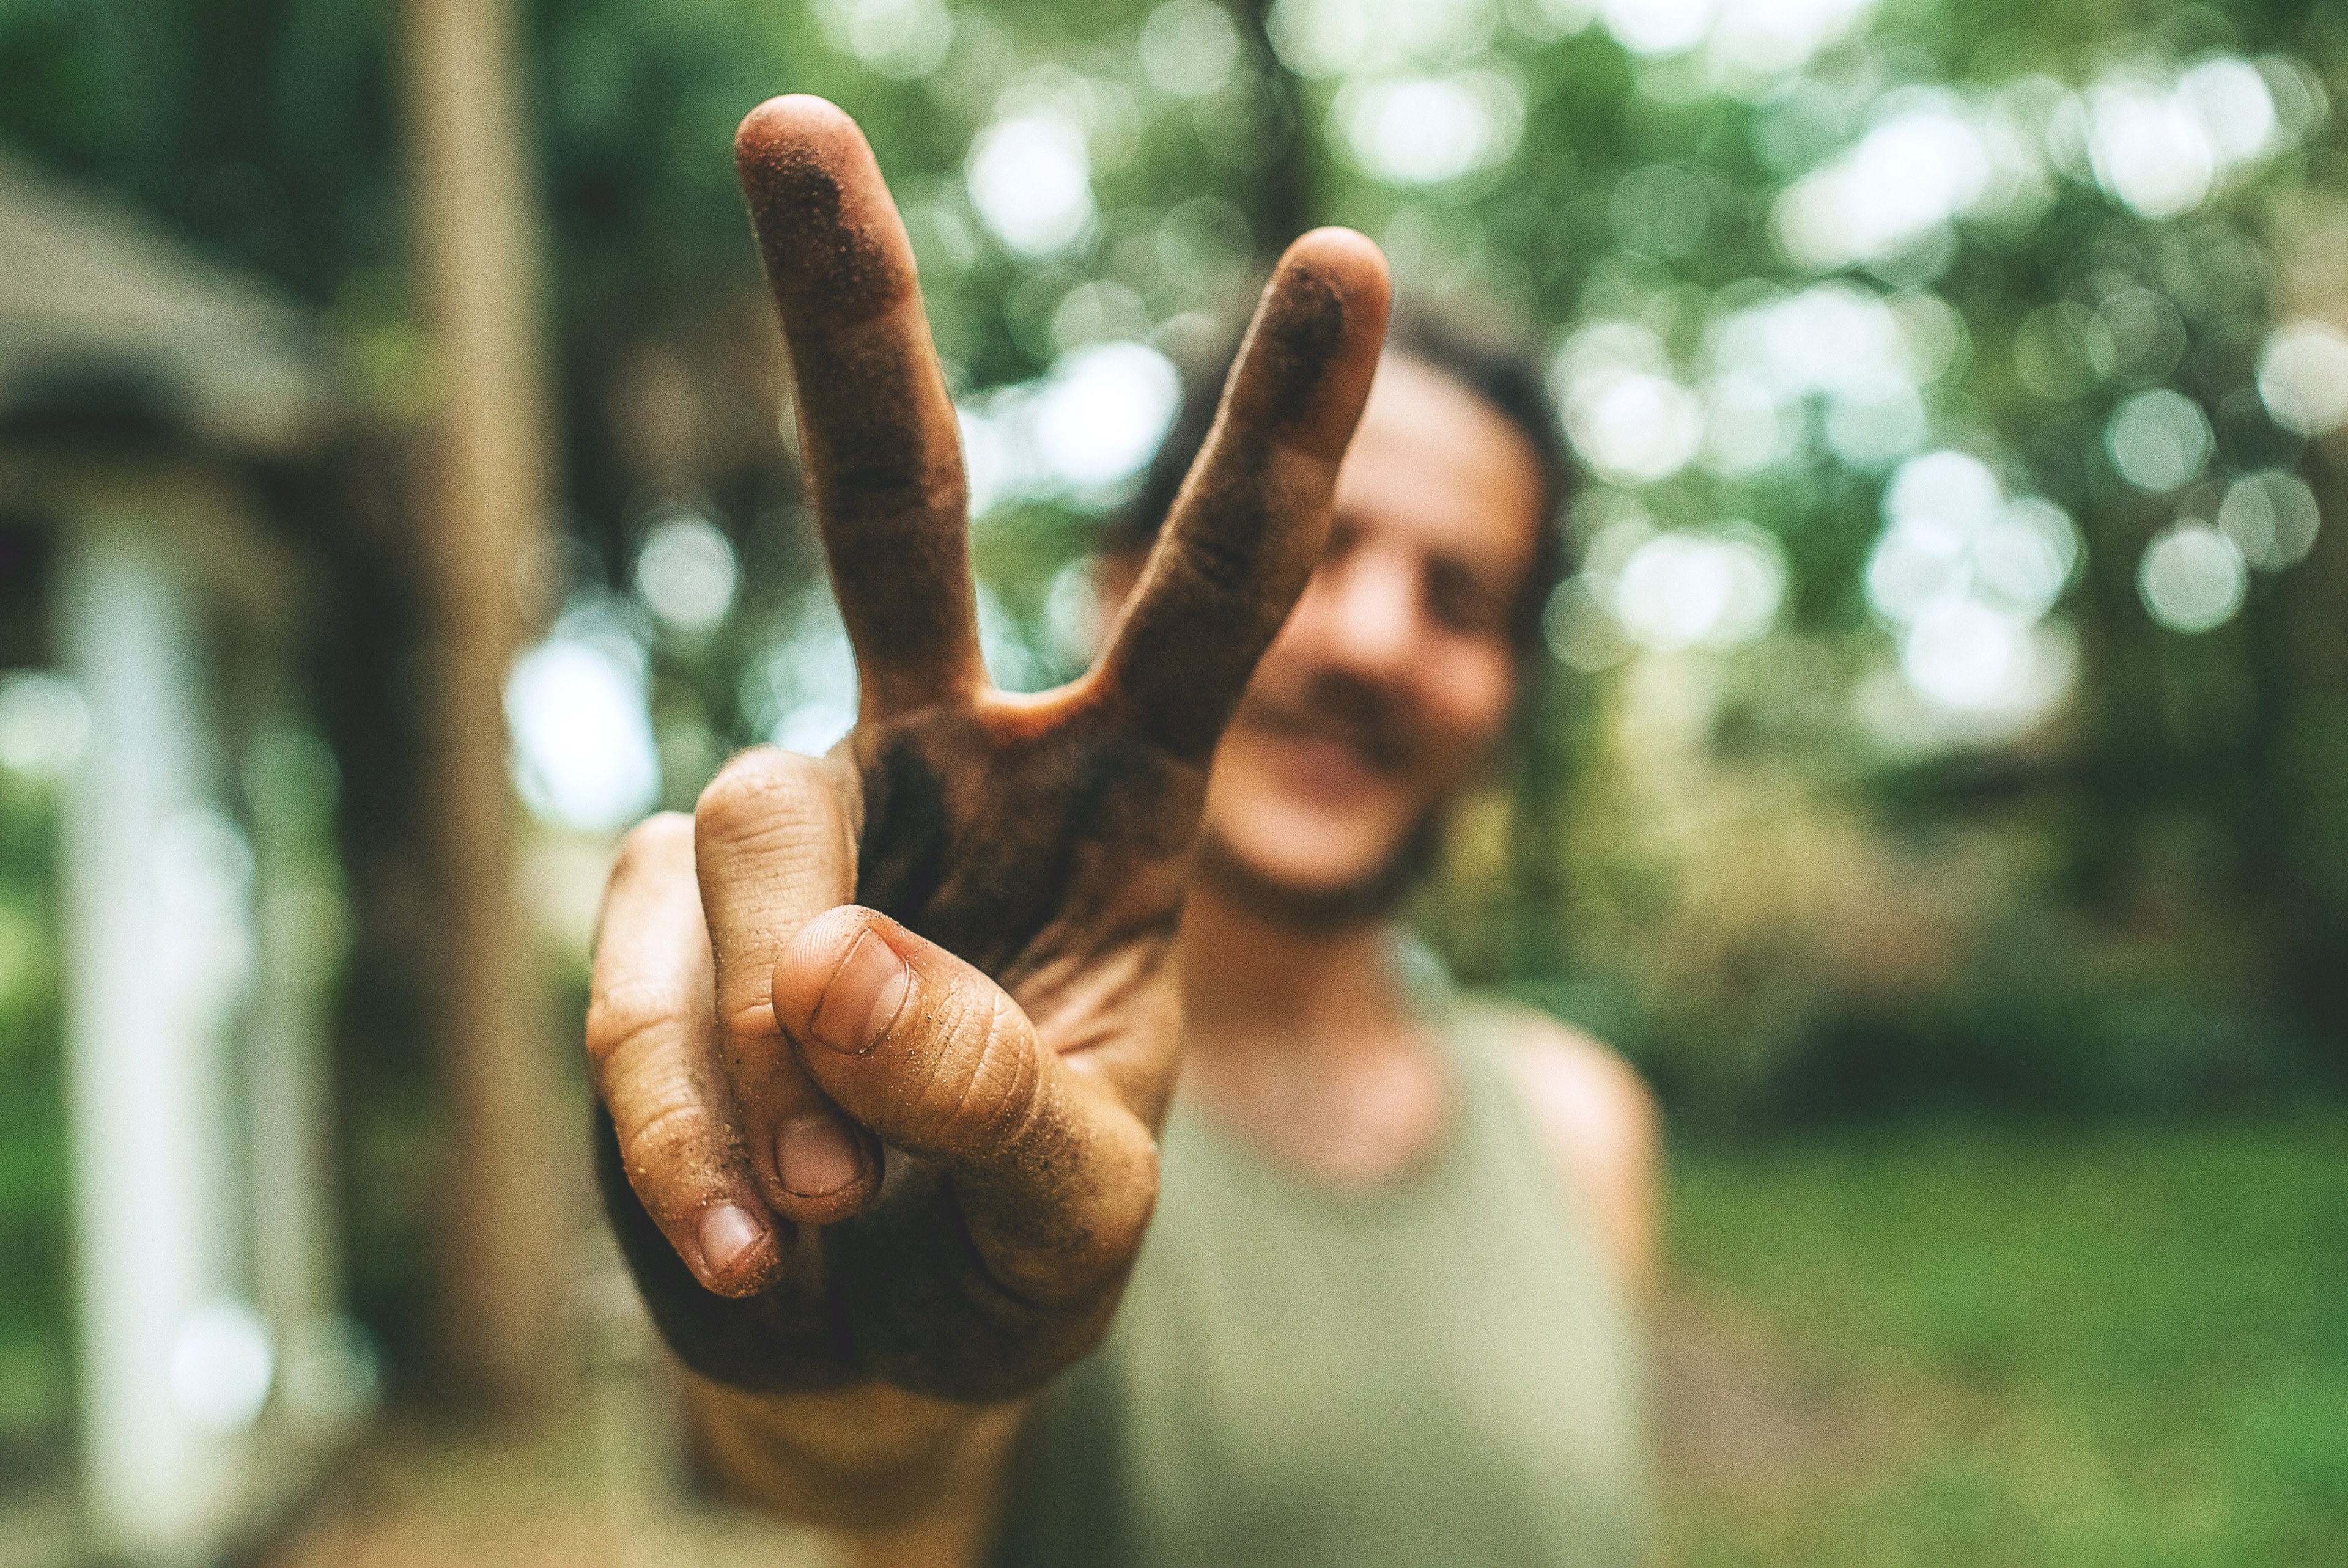 Wallpaper / man extends a peace sign with dirty hands in the wood, peace sign 4k wallpaper free download